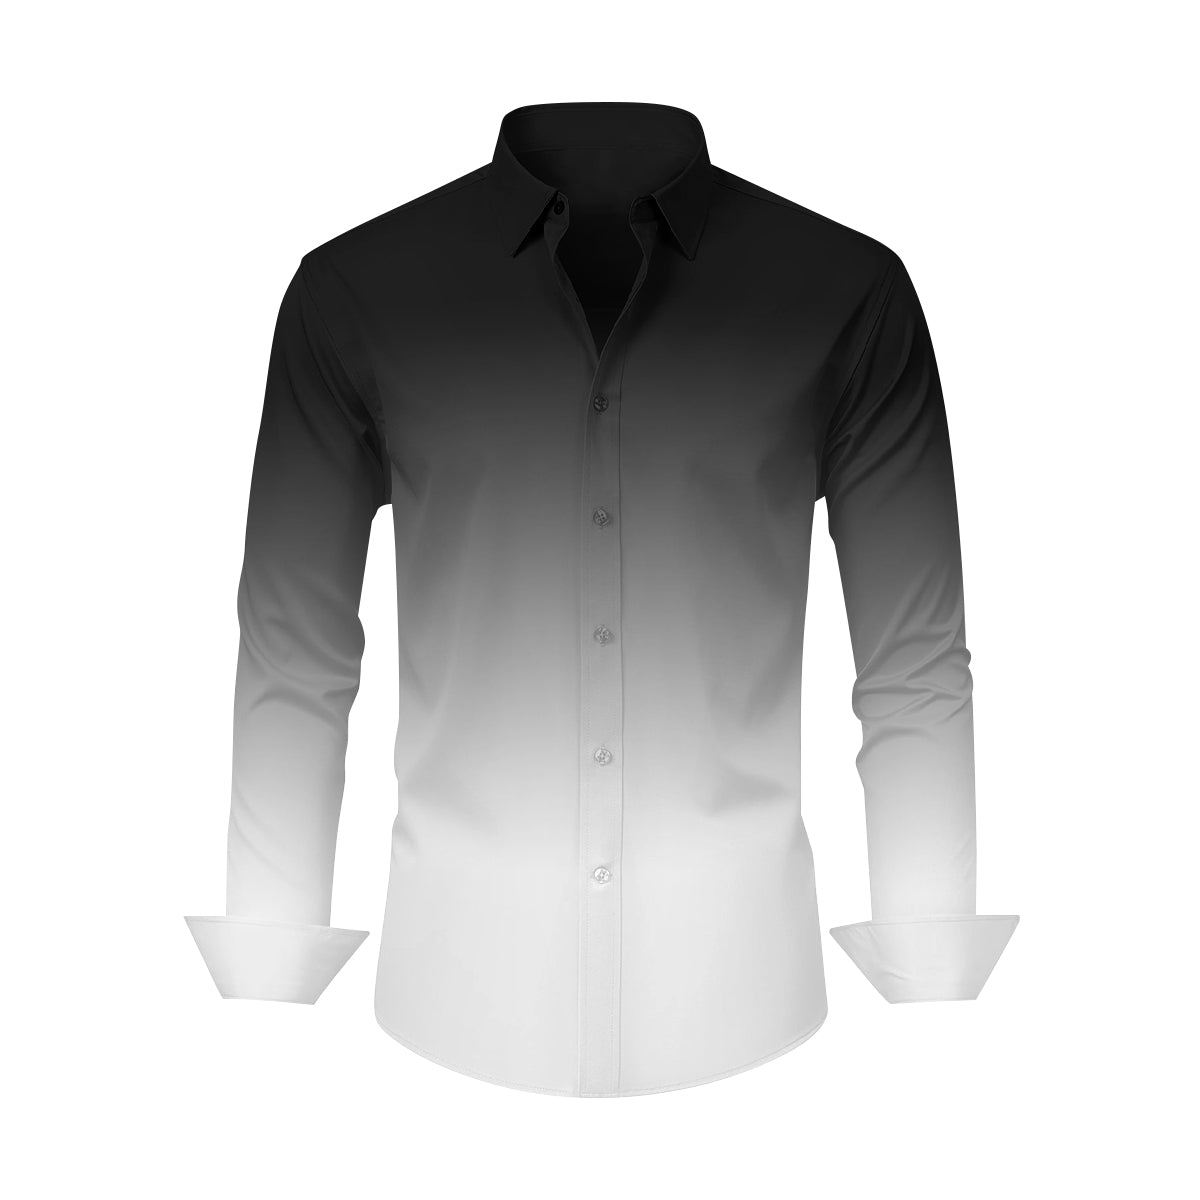 Black Ombre Shirt | 90s Grunge & Rocker Style for Men | Artistic & Unique Dress Shirt | Perfect Gifts for Him